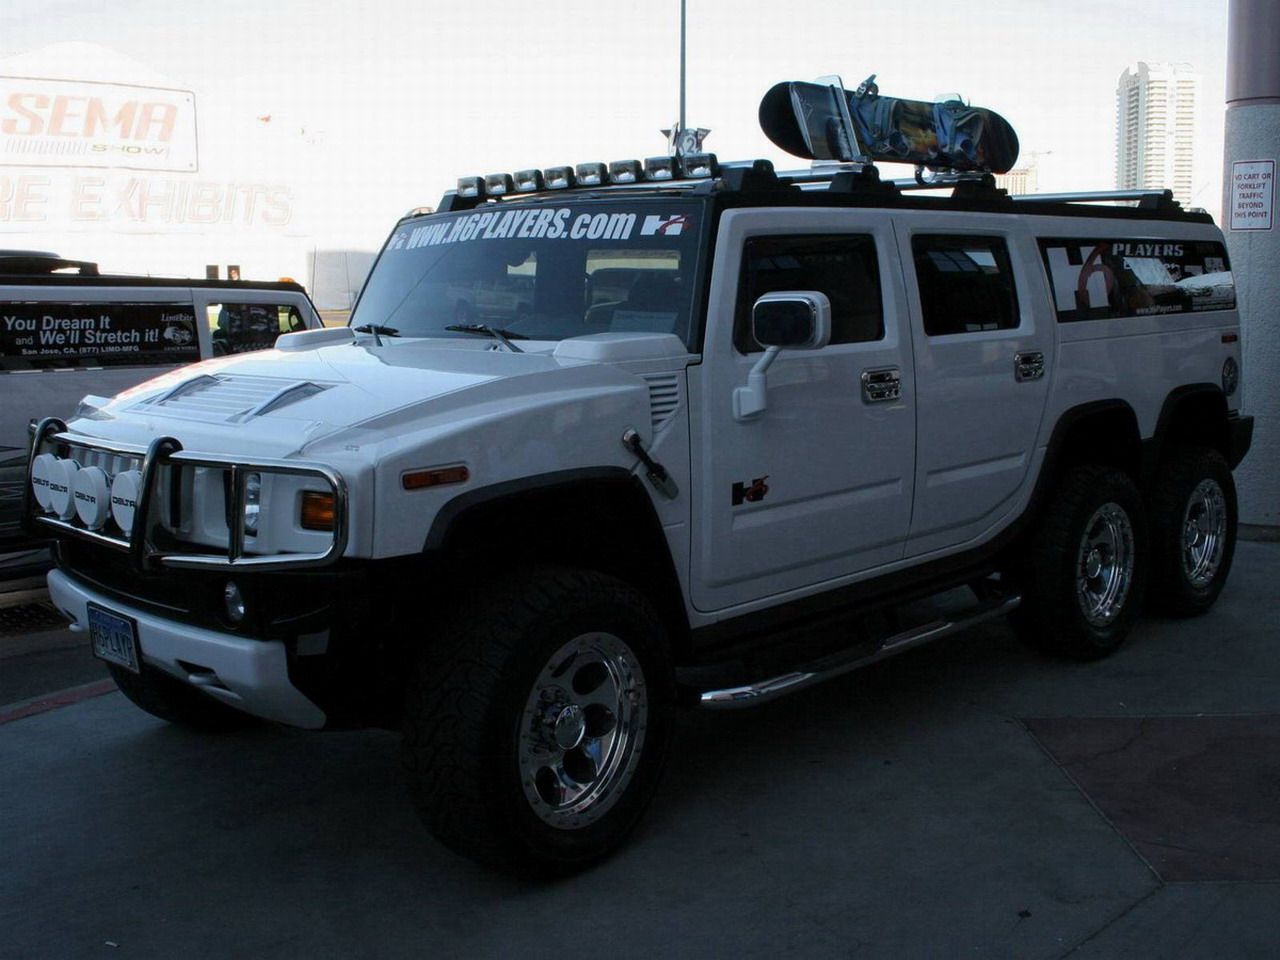 Hummer H6 Players Edition